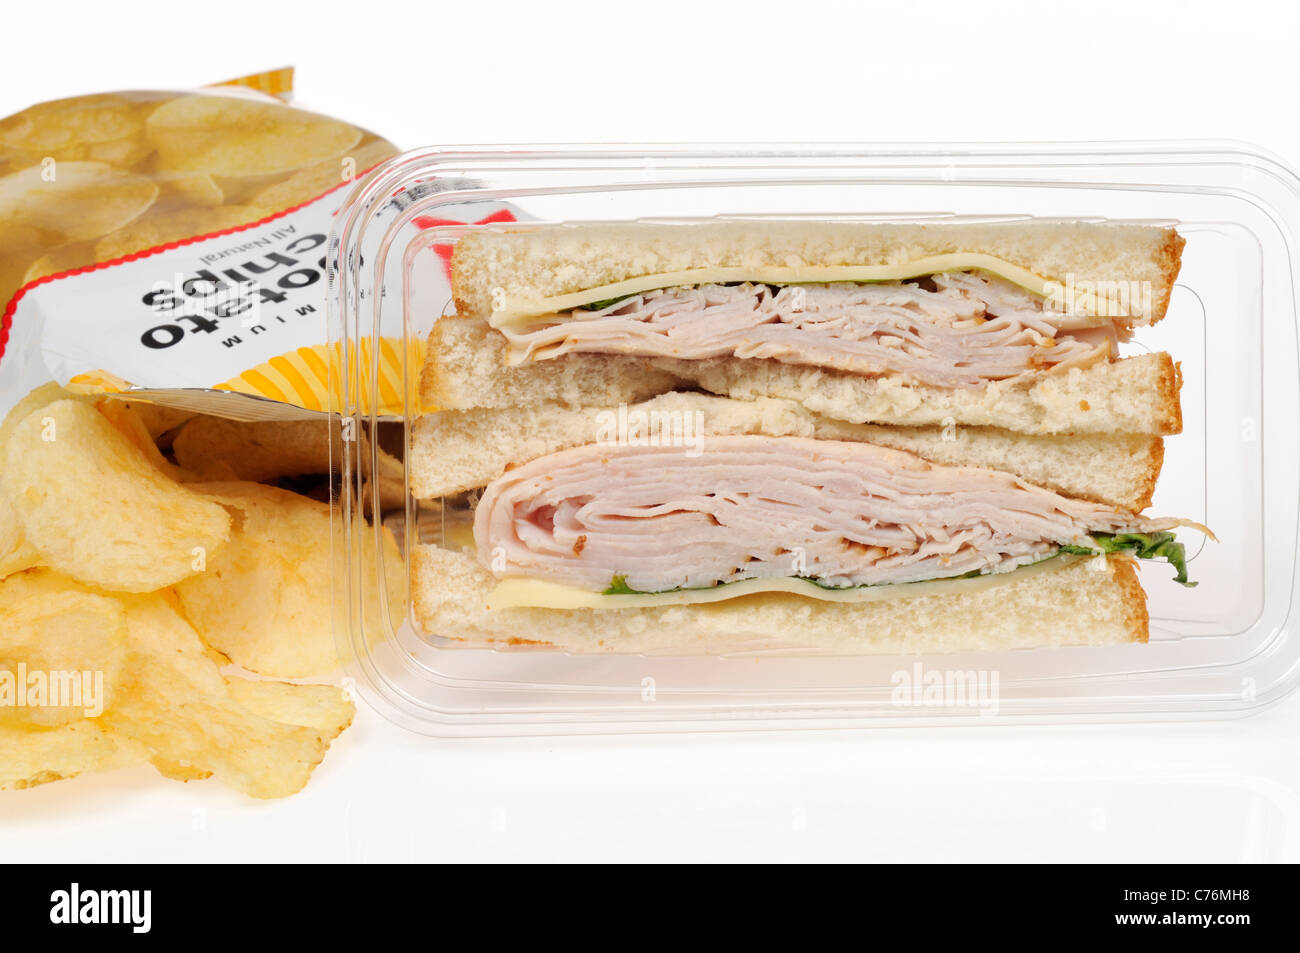 Prepared turkey and cheese take away sandwich in plastic pack with bag of crisps or potato chips on white background. Stock Photo